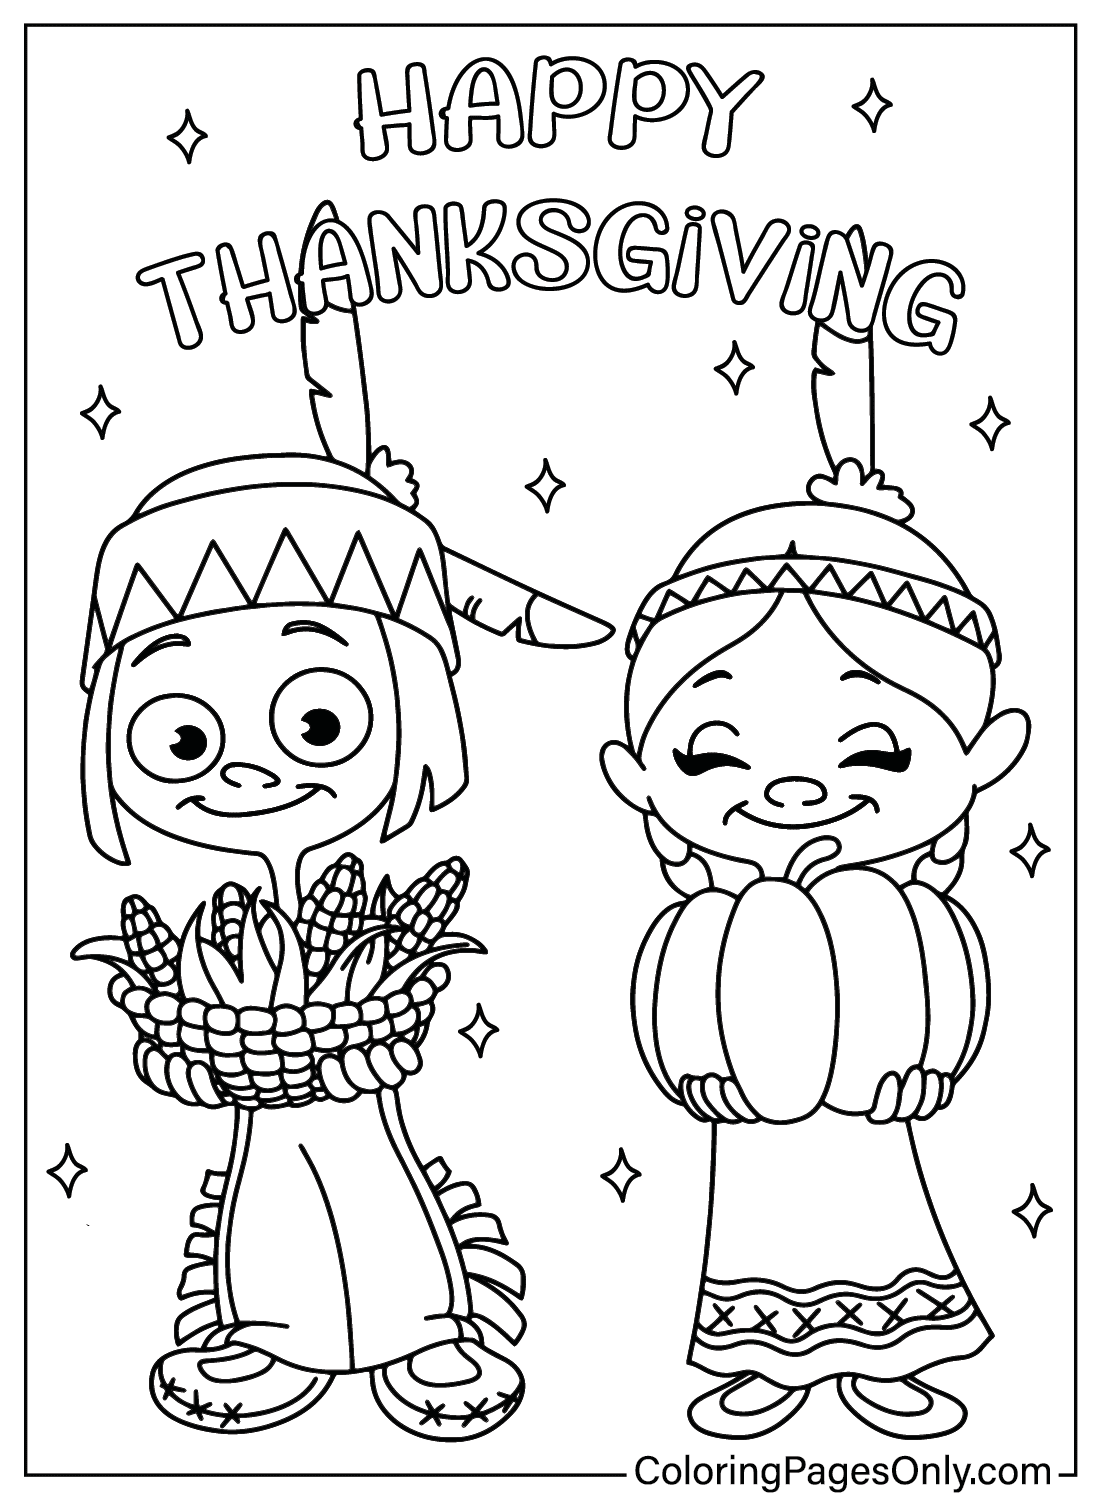 Coloring Page Thanksgiving Cartoon from Thanksgiving Cartoon